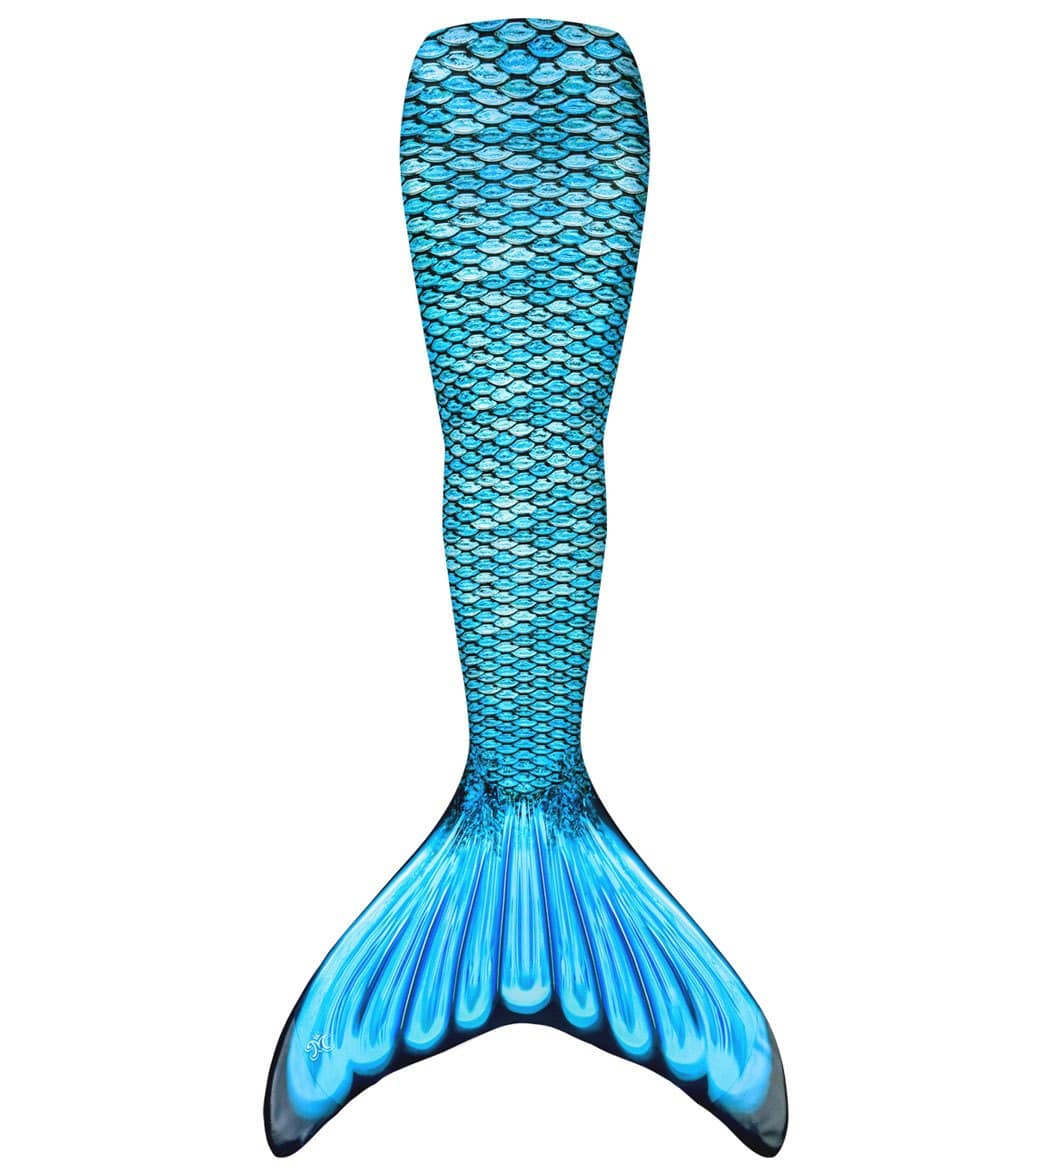 Fin Fun Tidal Teal Mermaid Tail & Monofin Youth/Adult - Youth Large 10 Neoprene/Polyester/Poly-Propylene/Spandex - Swimoutlet.com